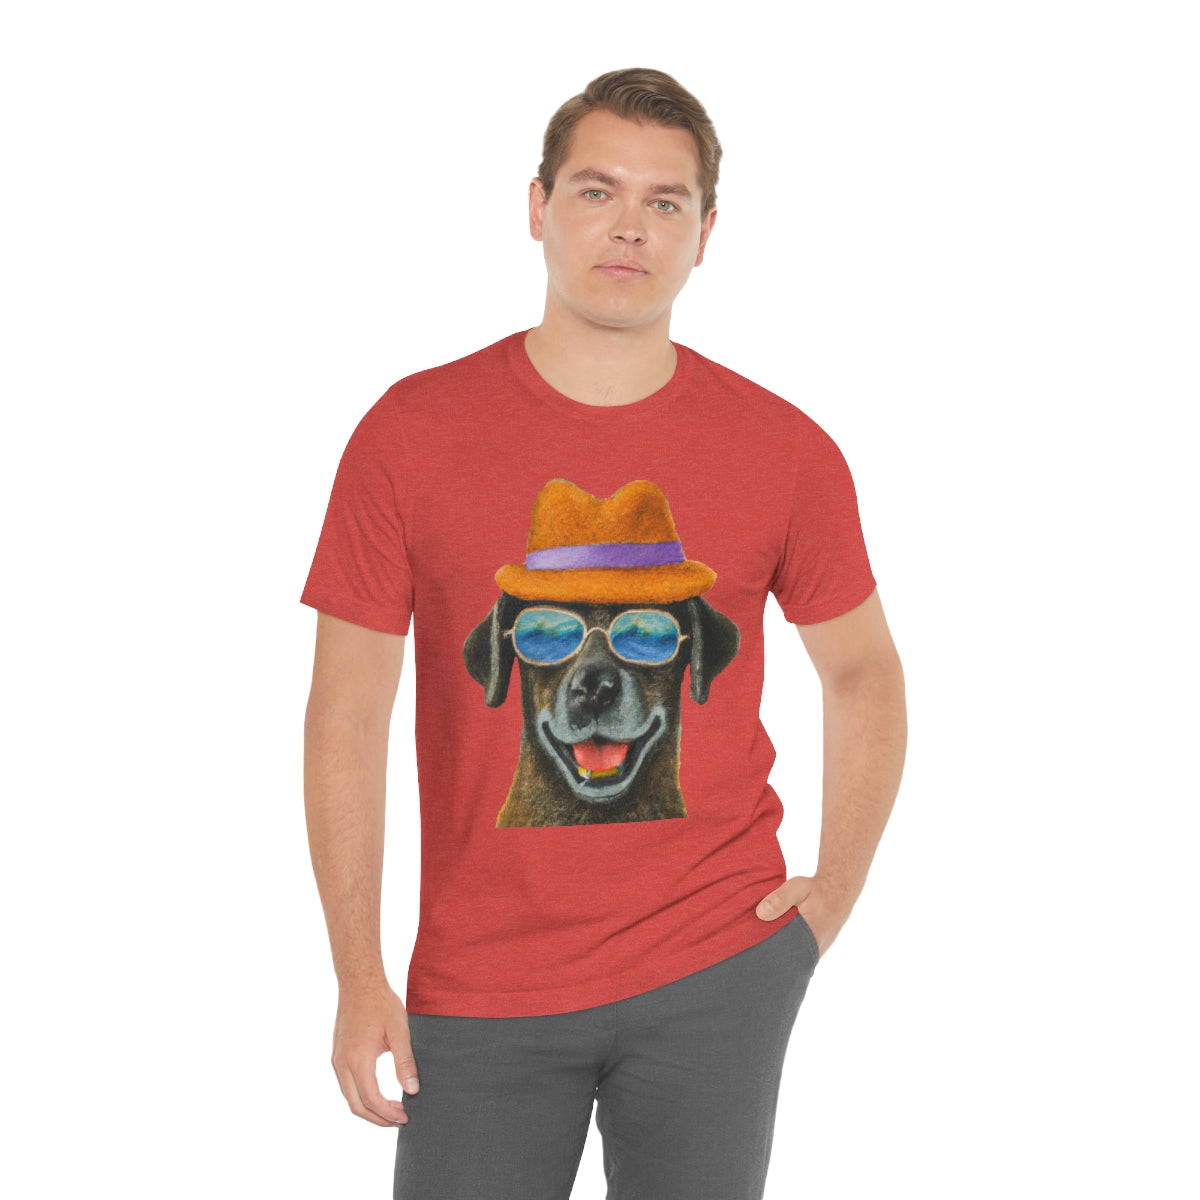 Dog at the beach wearing a hat and sunglasses arts T-shirt for women